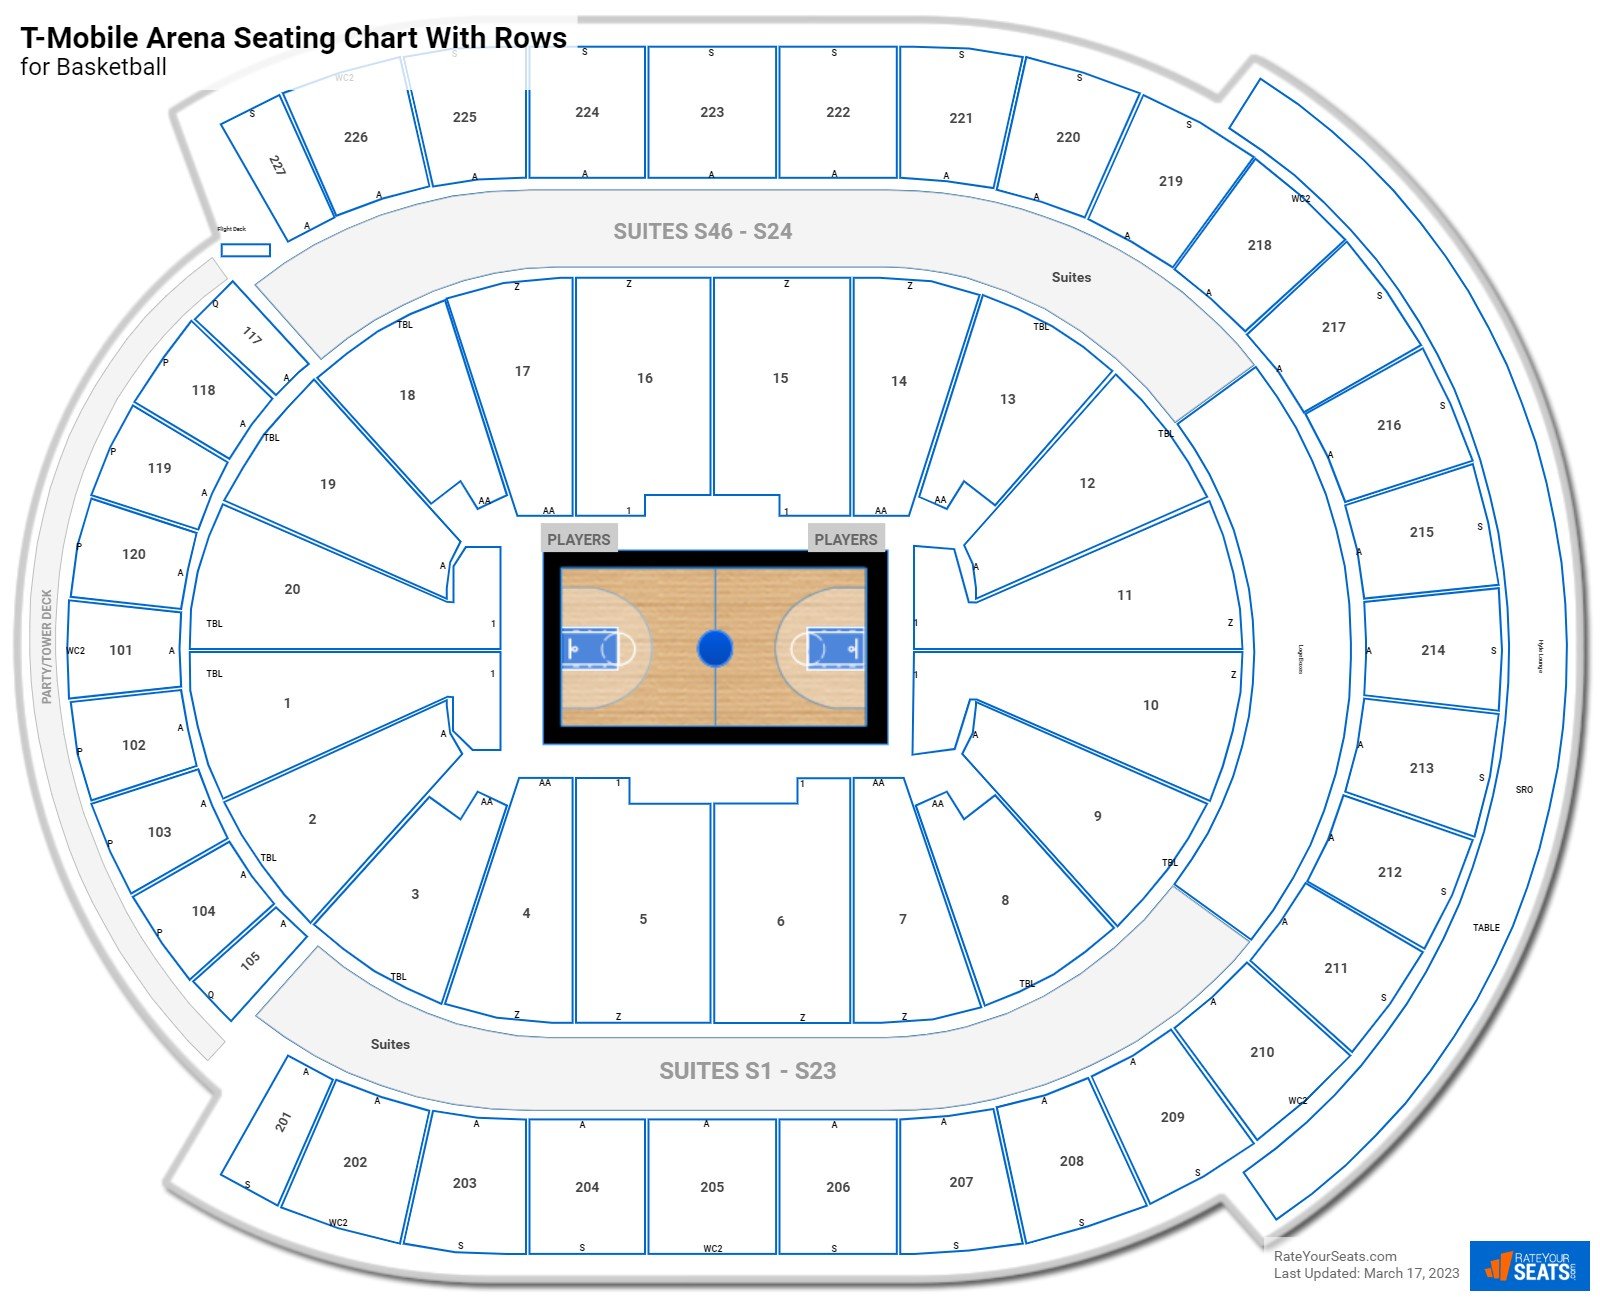 T-Mobile Arena seating chart with row numbers